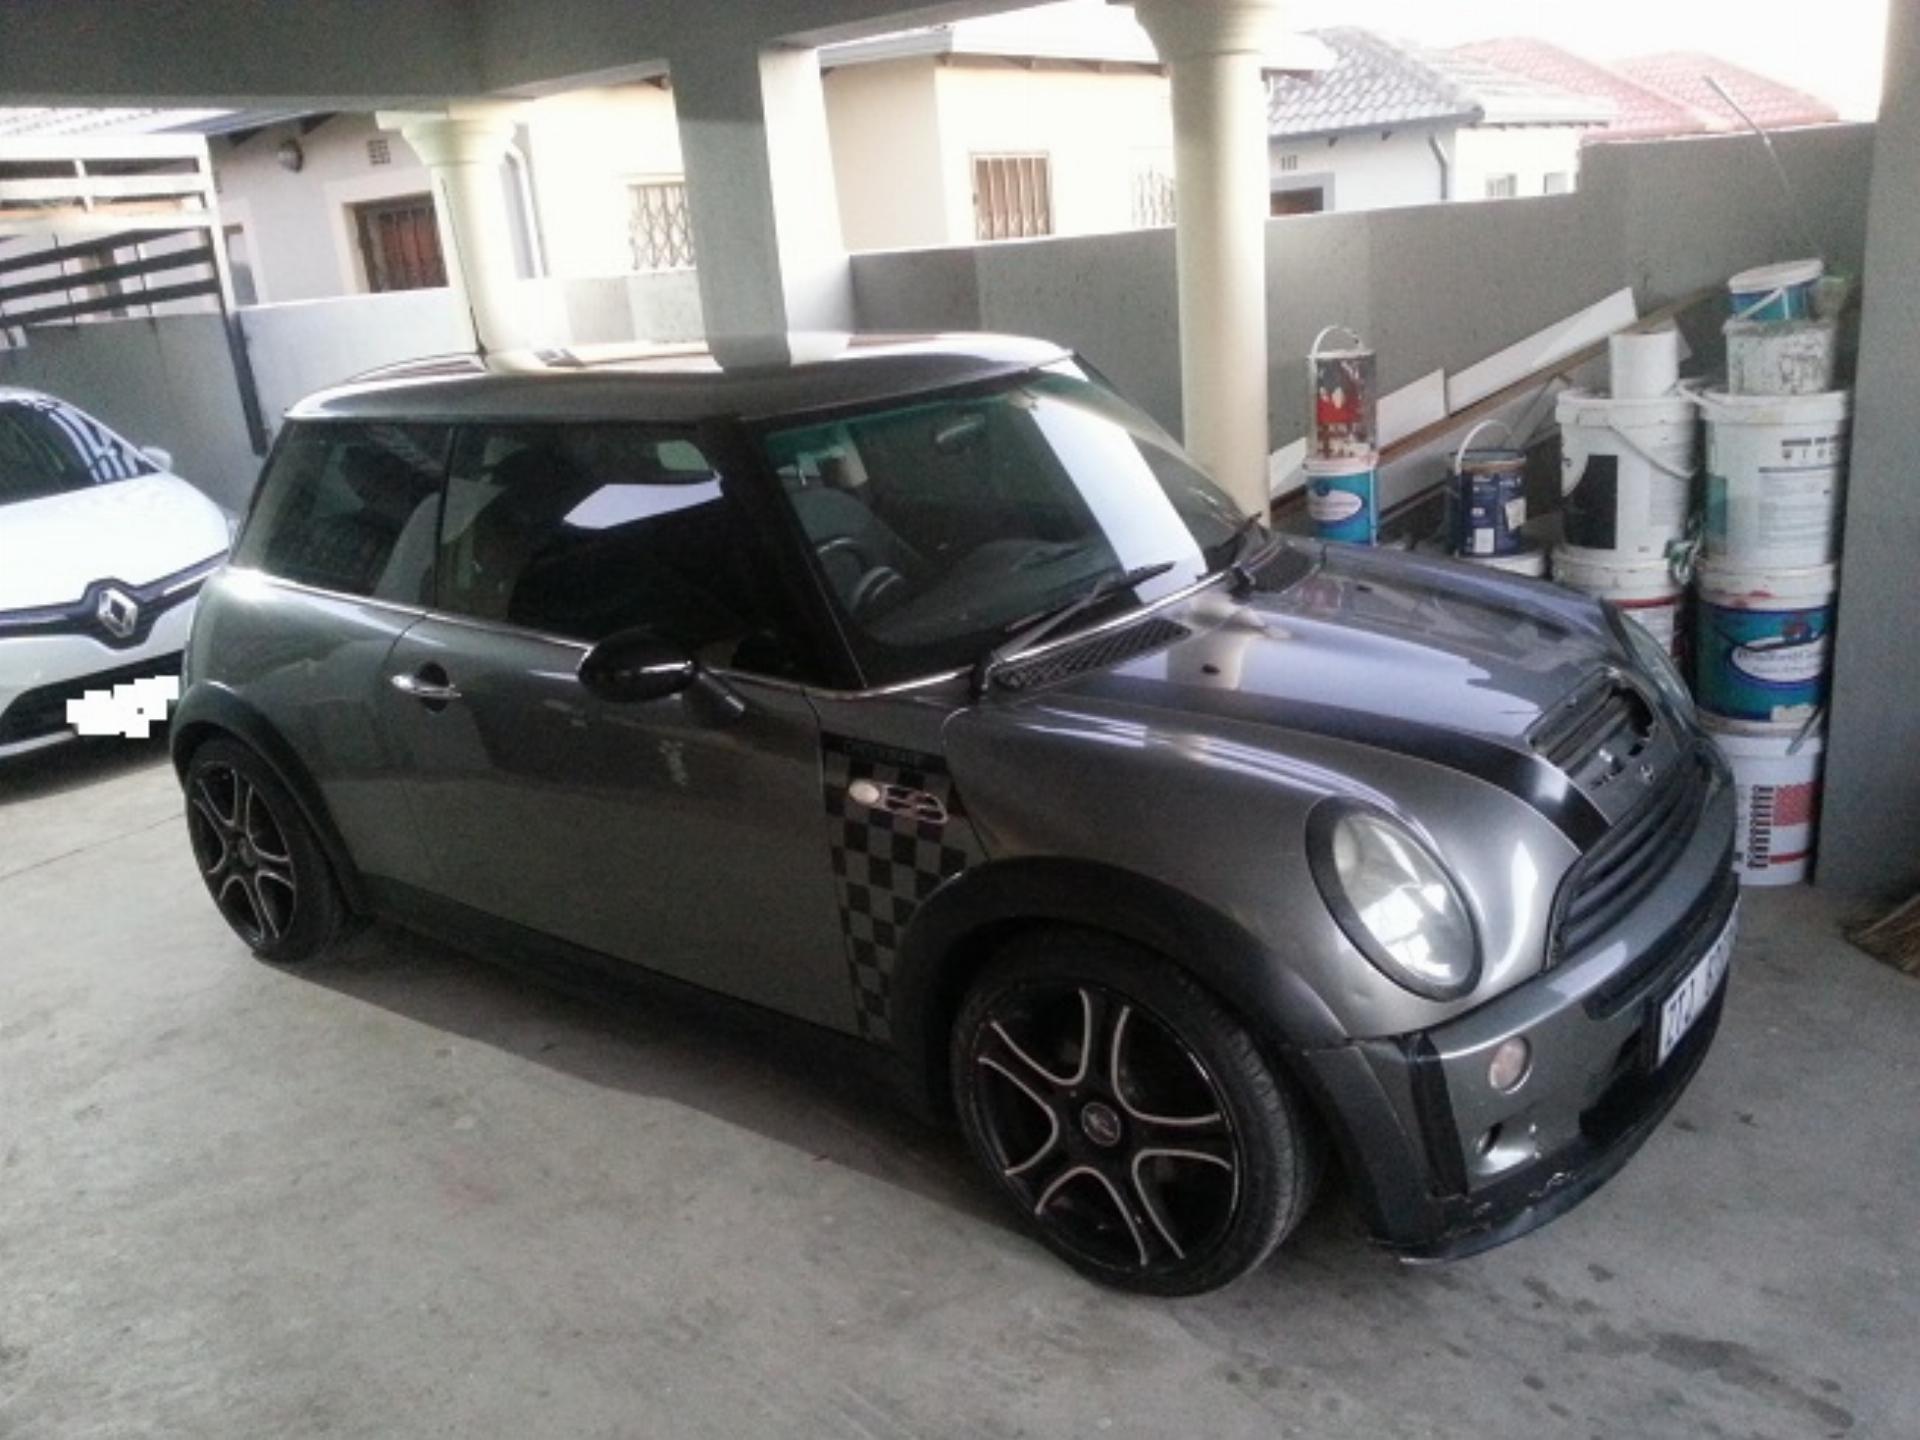 Mini Cooper S 1.6 Supercharged